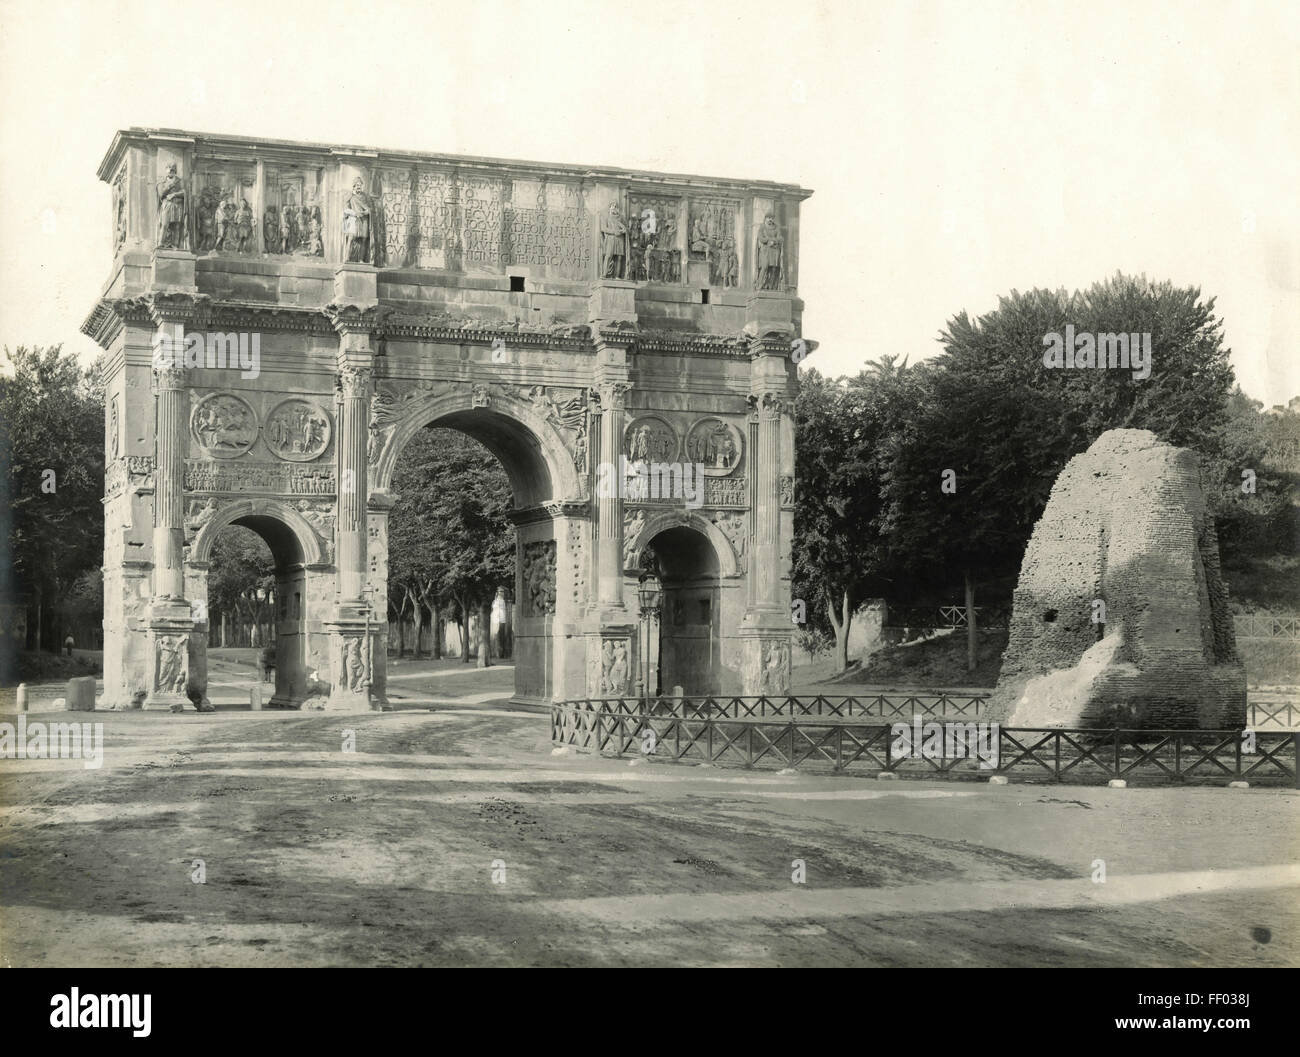 Arch of Constantine and Meta Sudans, Rome, Italy Stock Photo - Alamy